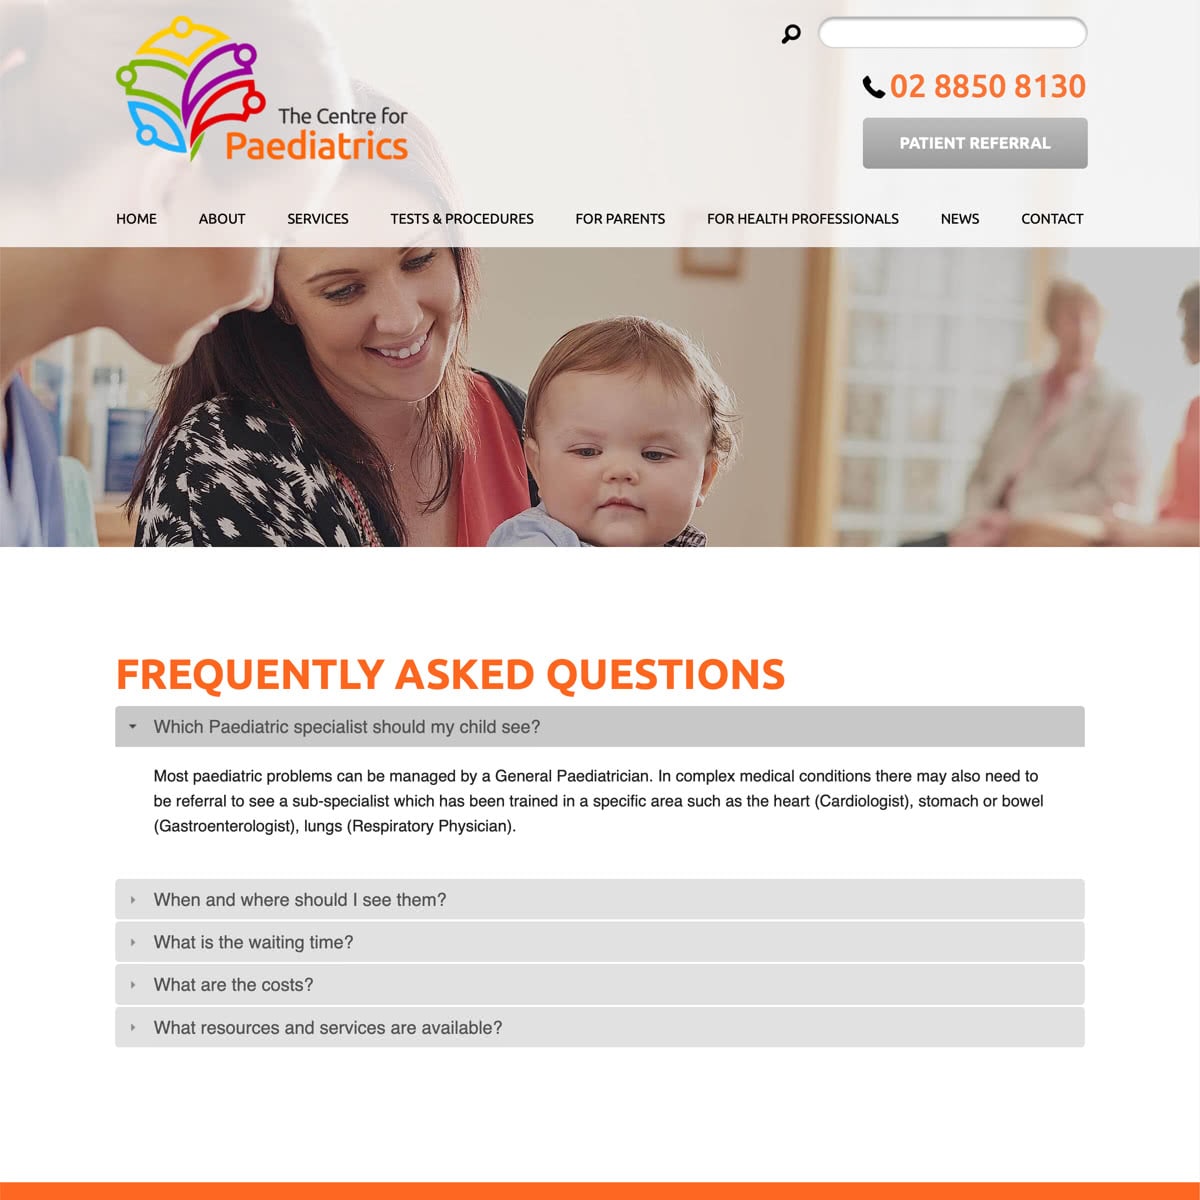 The Centre for Paediatrics - Frequently Asked Questions